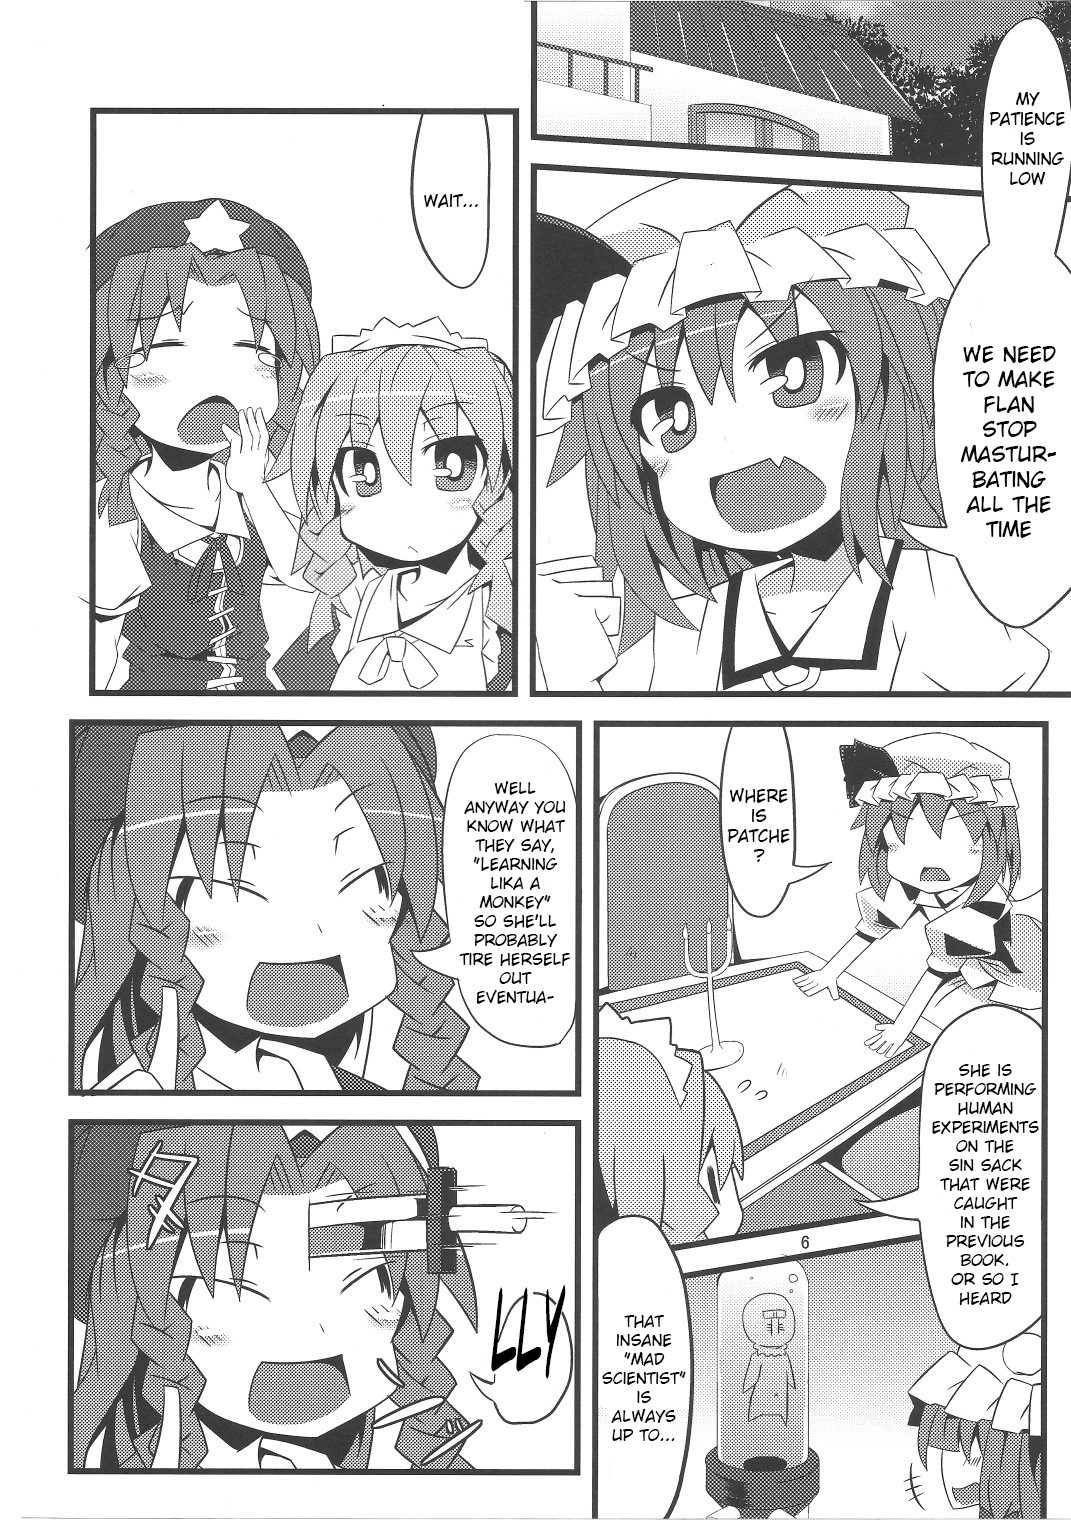 (Kouroumu 7) [Angelic Feather (Land Sale)] Tentacle Play (Touhou Project) [English] page 5 full